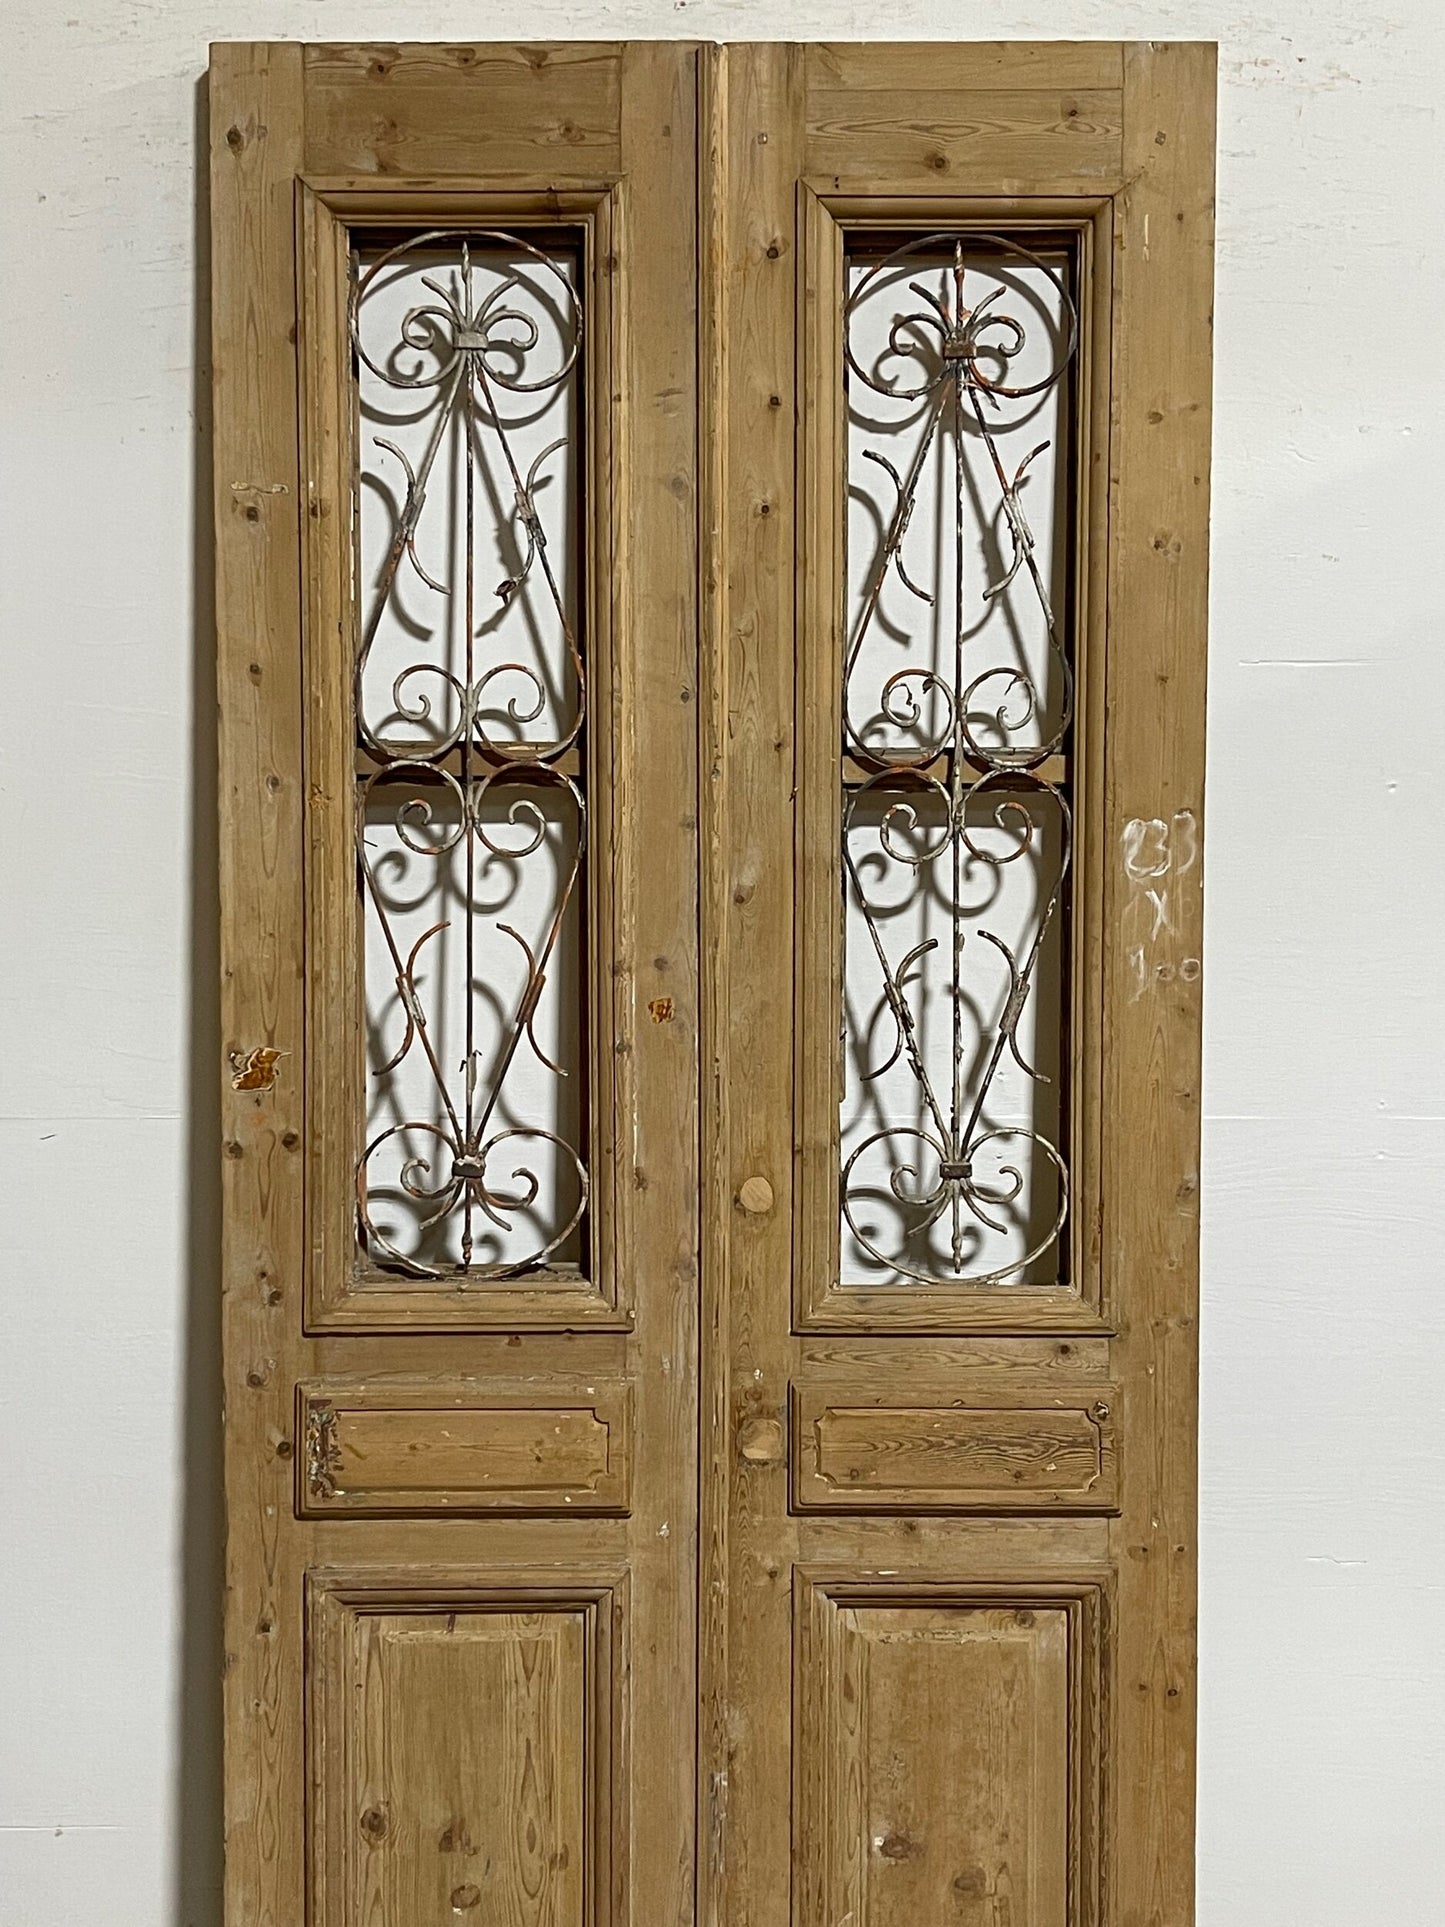 Antique french panel doors with metal (92 x 40) I038